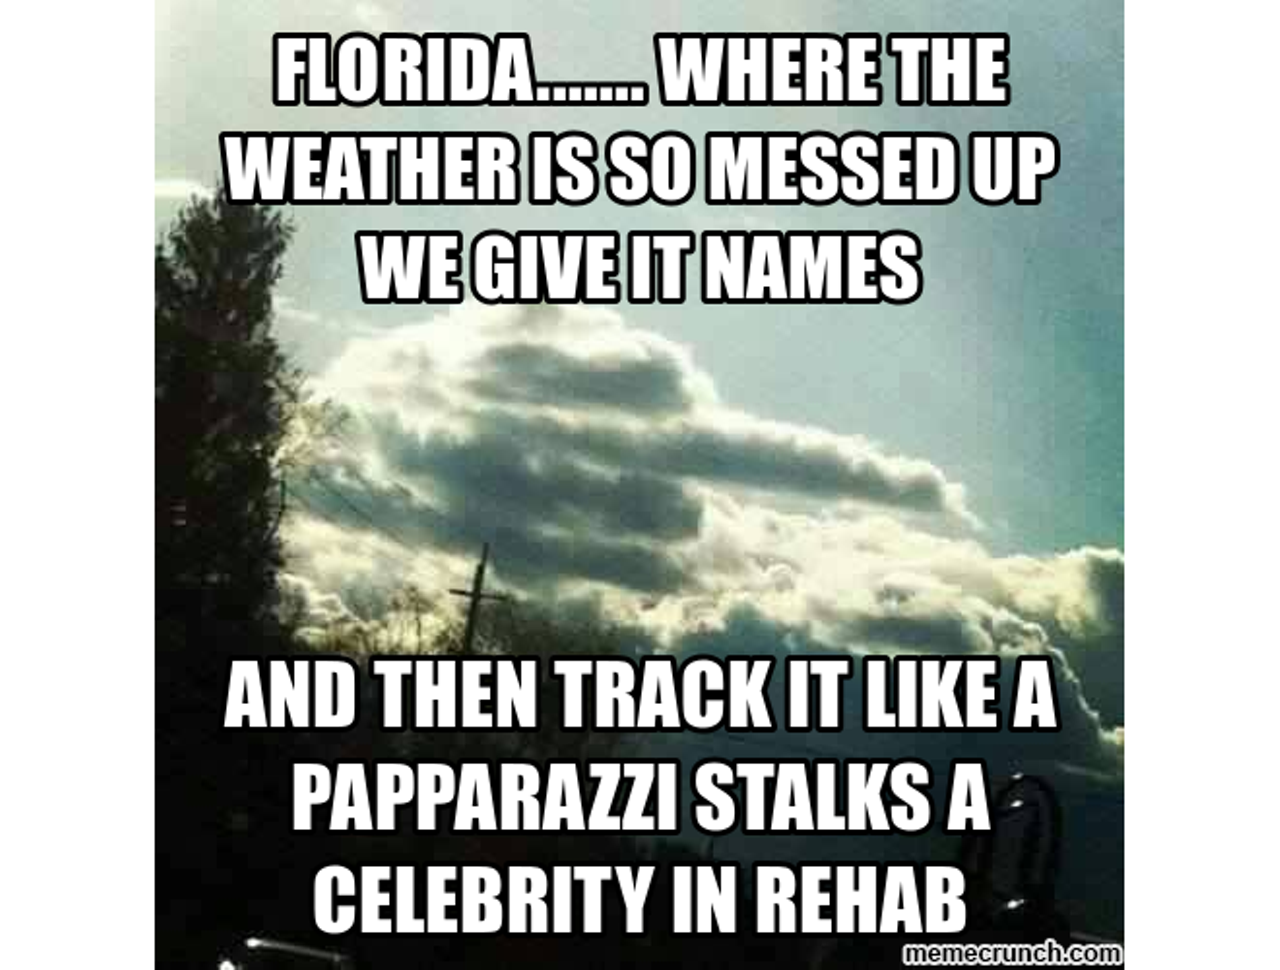 There's also a ton of memes about hurricanes. But, we'll just show this one.